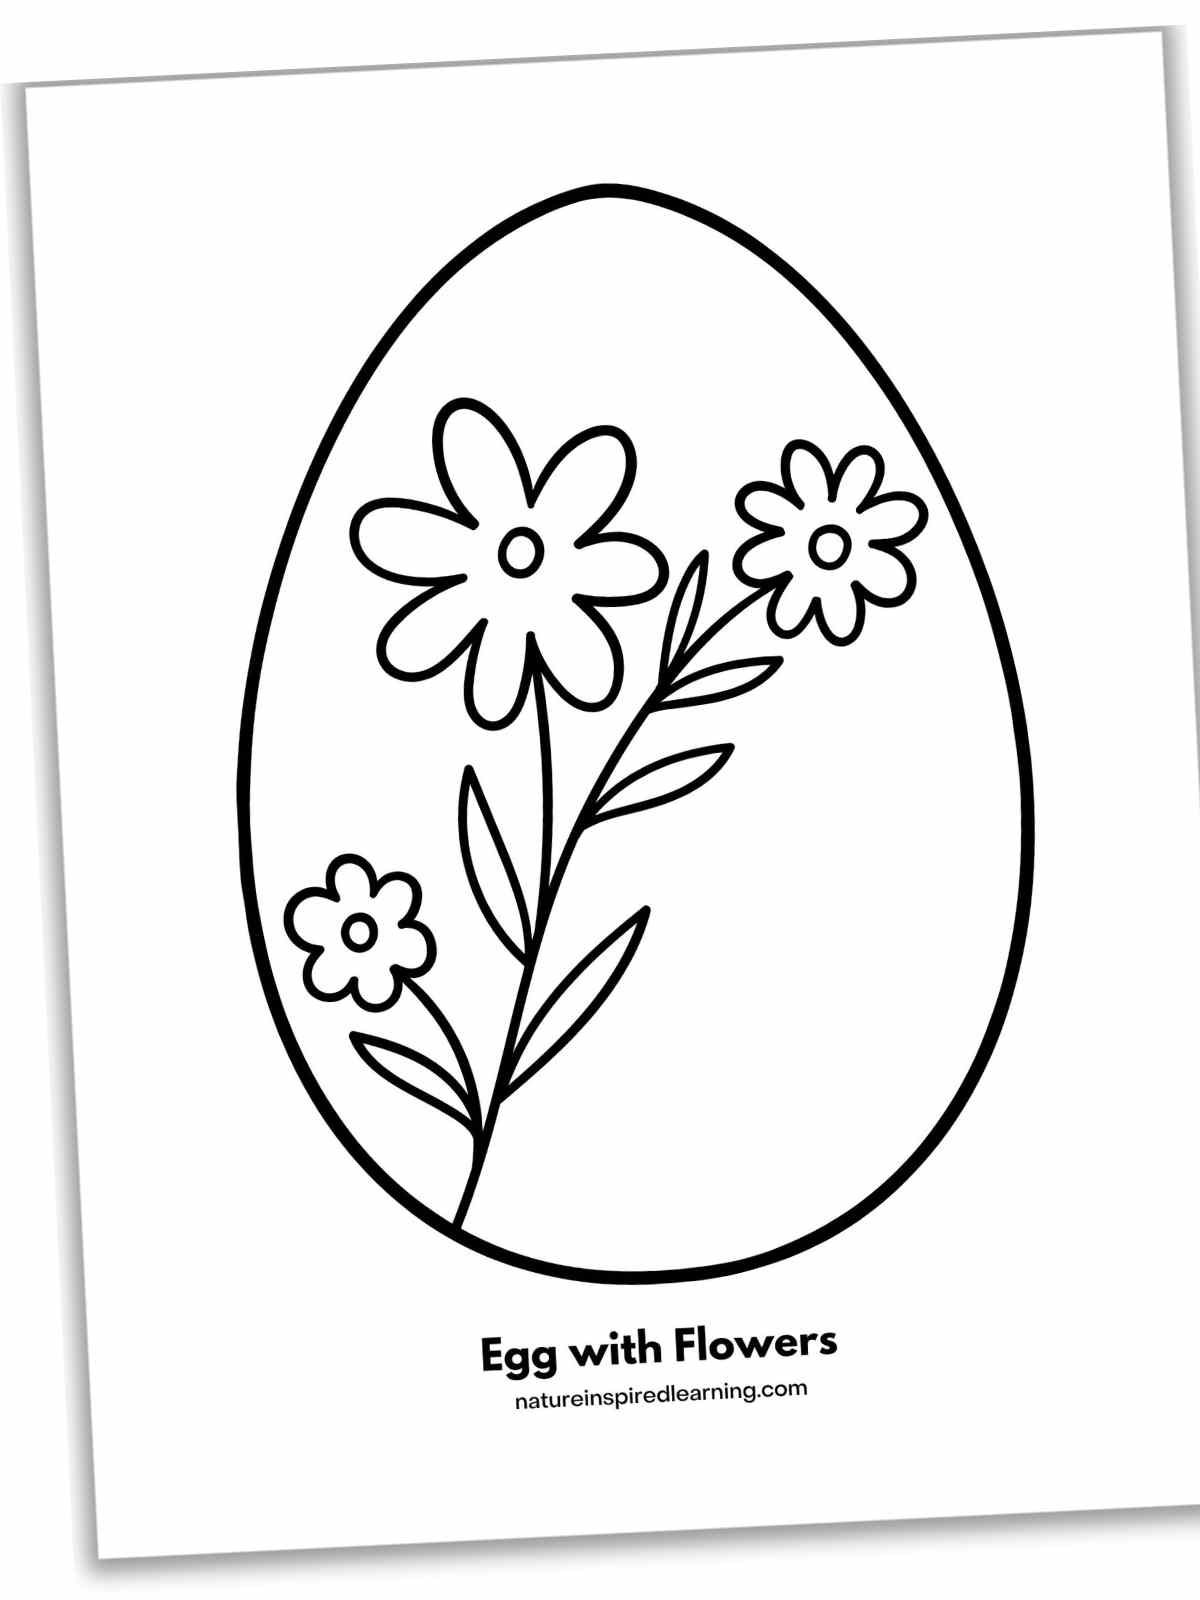 One large egg outline with a flower stem with three flowers and leaves inside